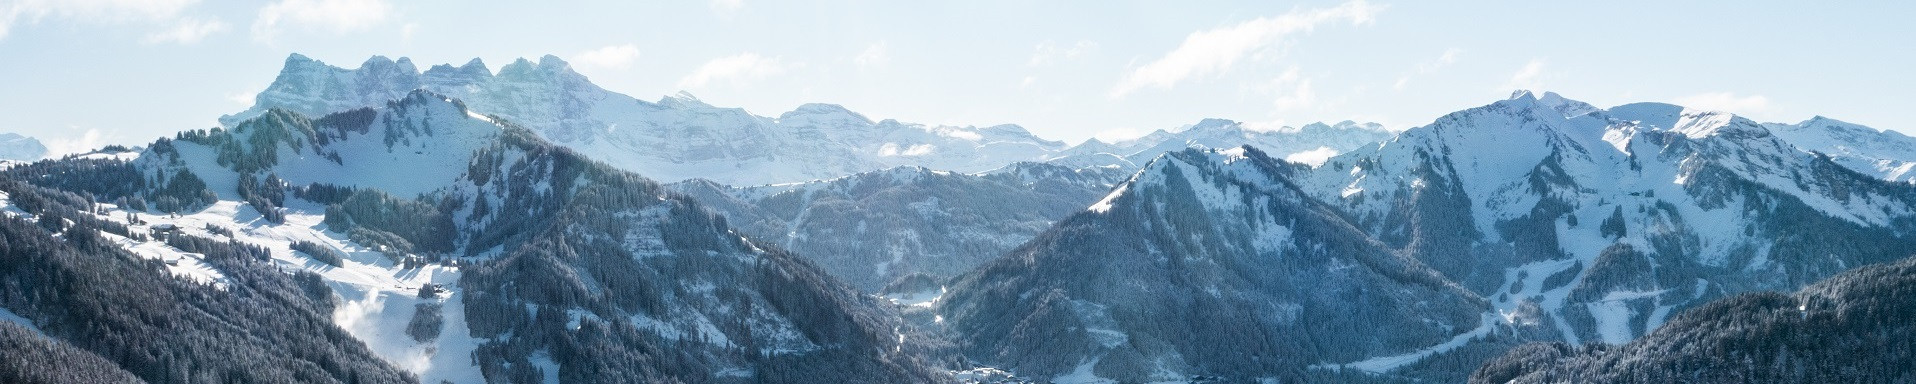 View over the mountains, taken from Chatel ski slopes